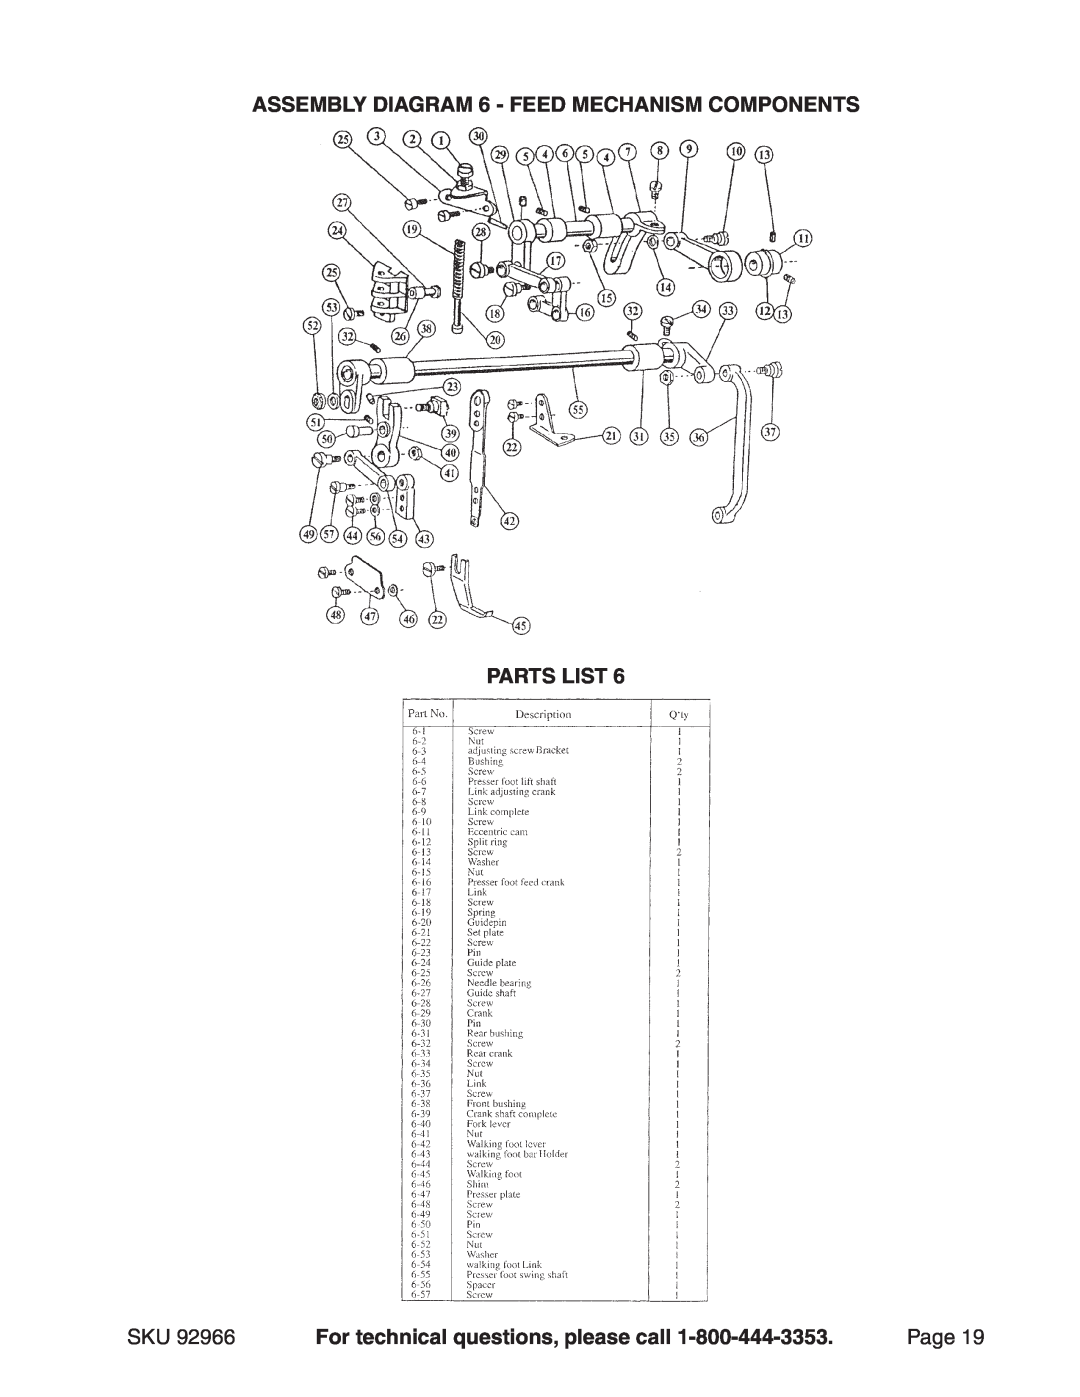 Harbor Freight Tools 92966 manual ASSEMBLY Diagram 6 - Feed mechanism components, Parts List, Page 